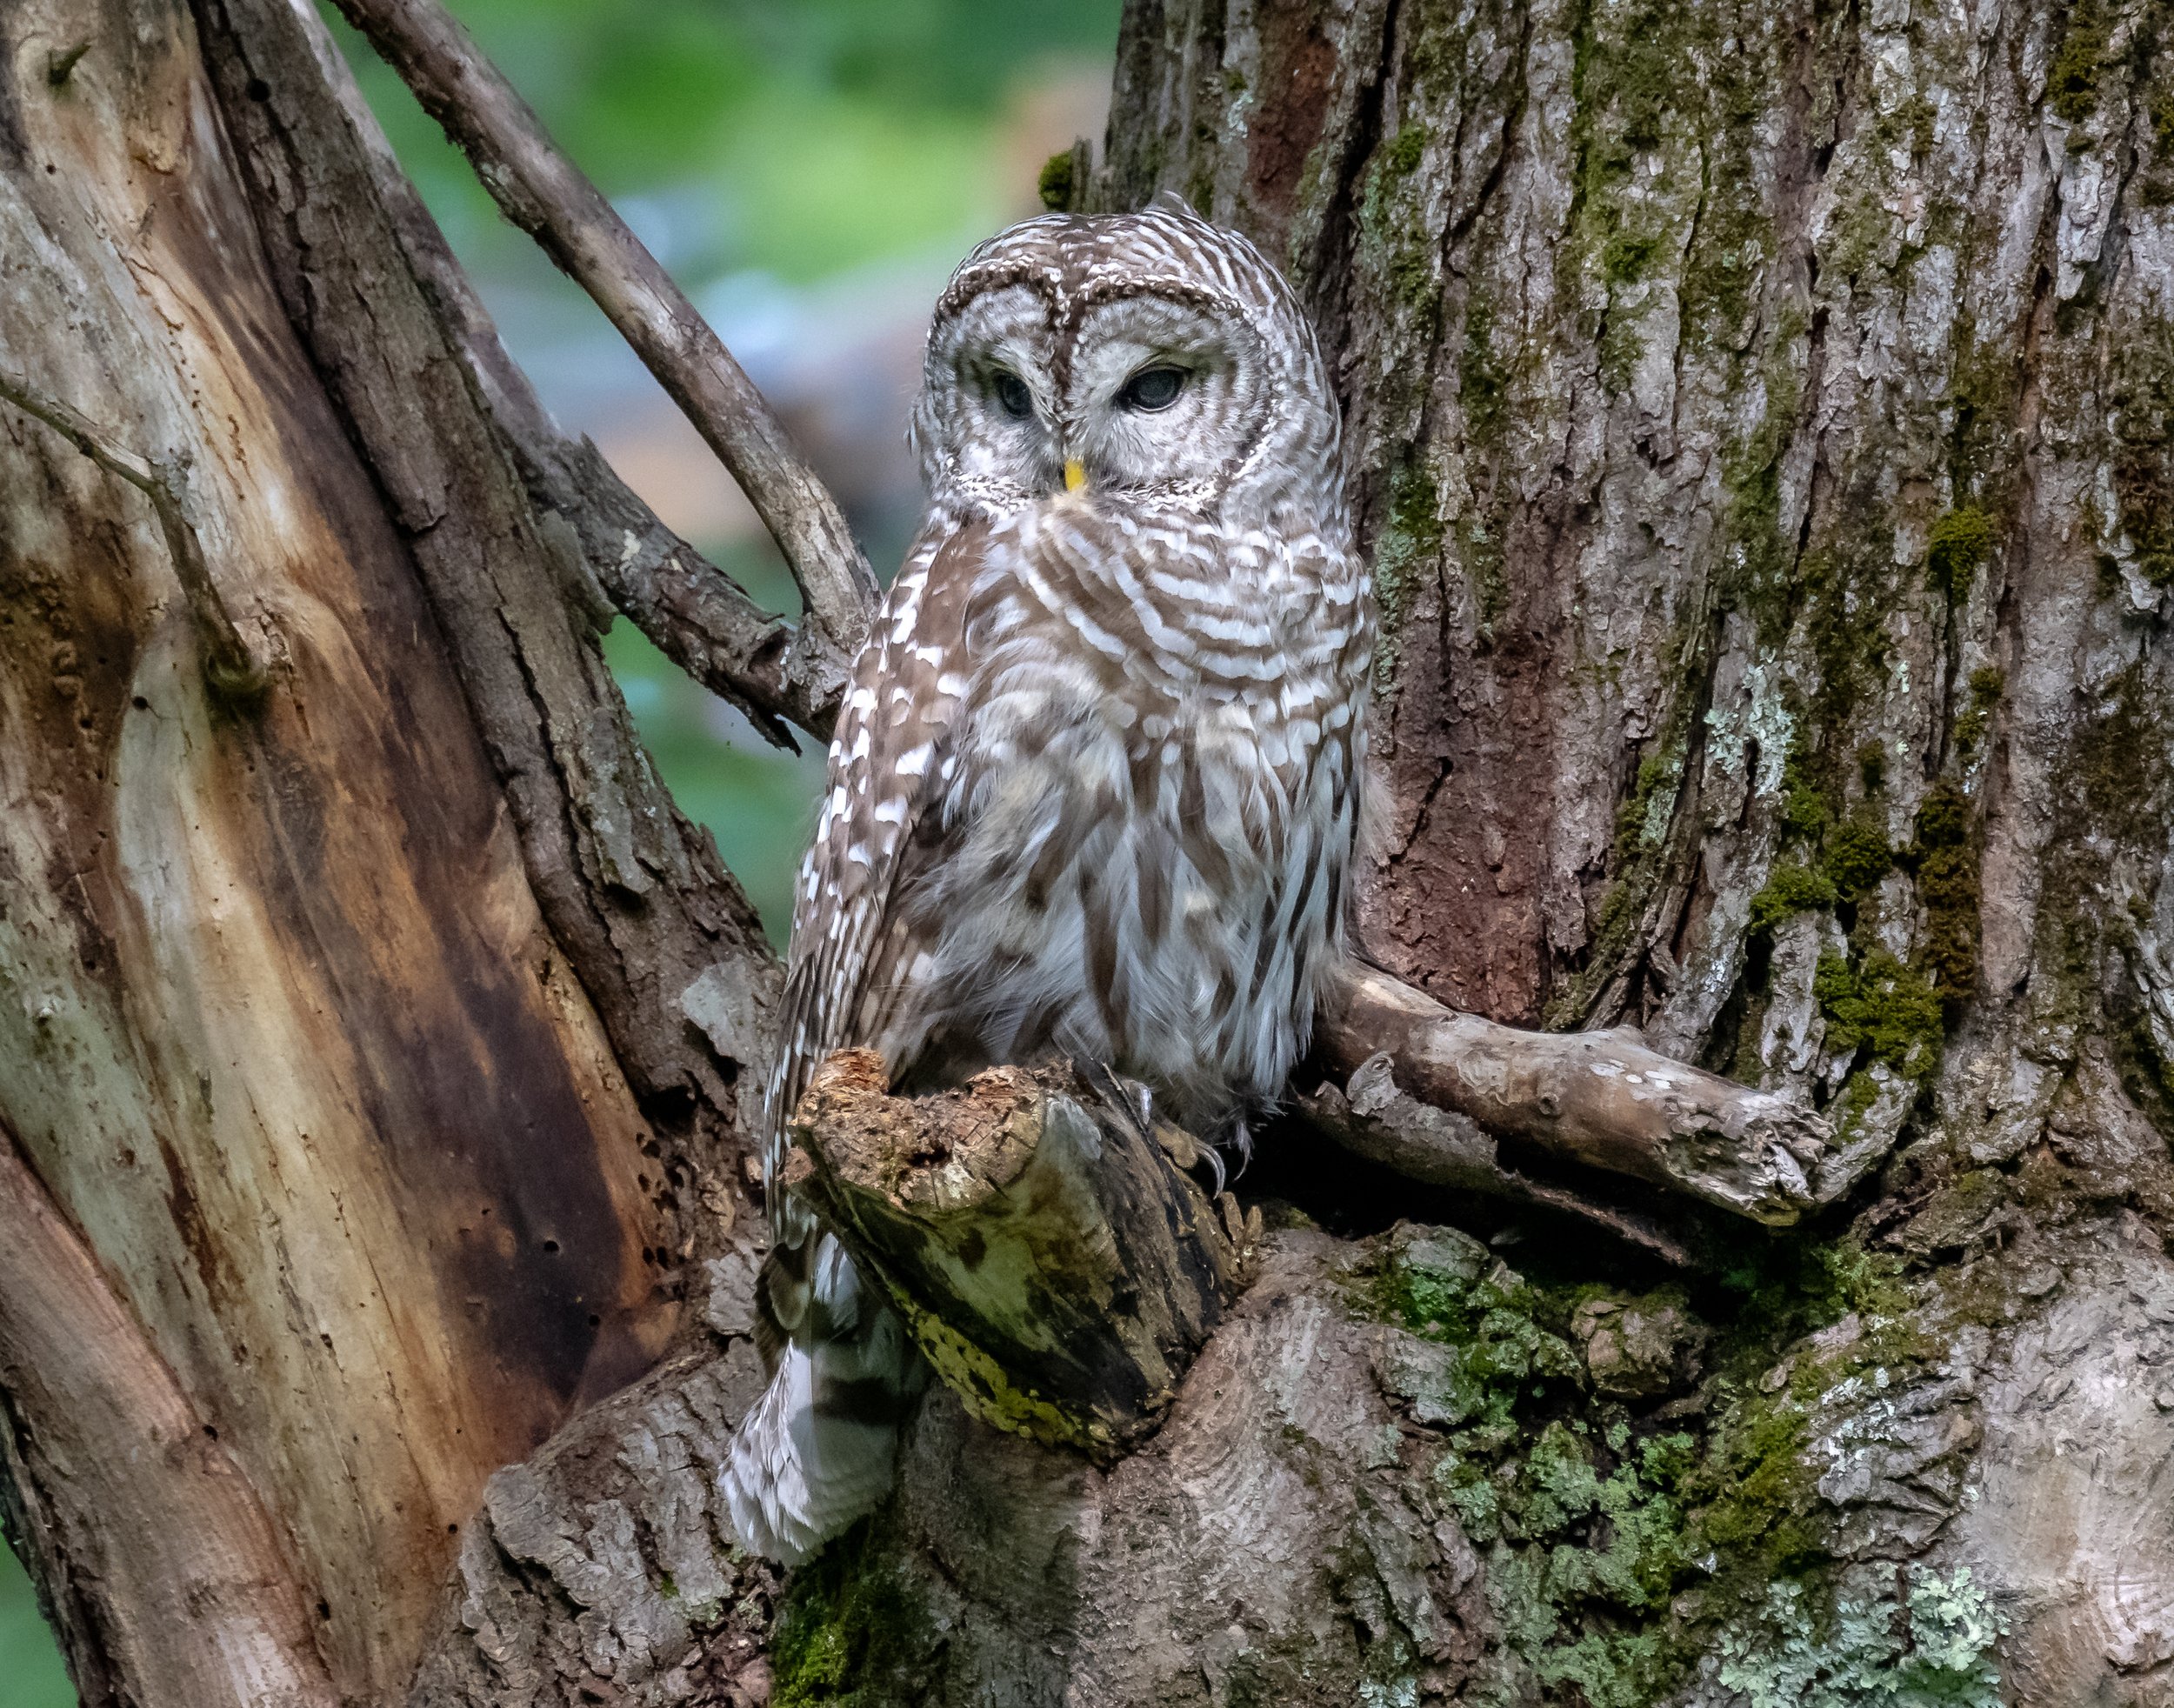   Here’s our back yard barred owl buddy. It lives around our house and we see it quite often. One morning it was hunting our lawn from the roof of my car!  